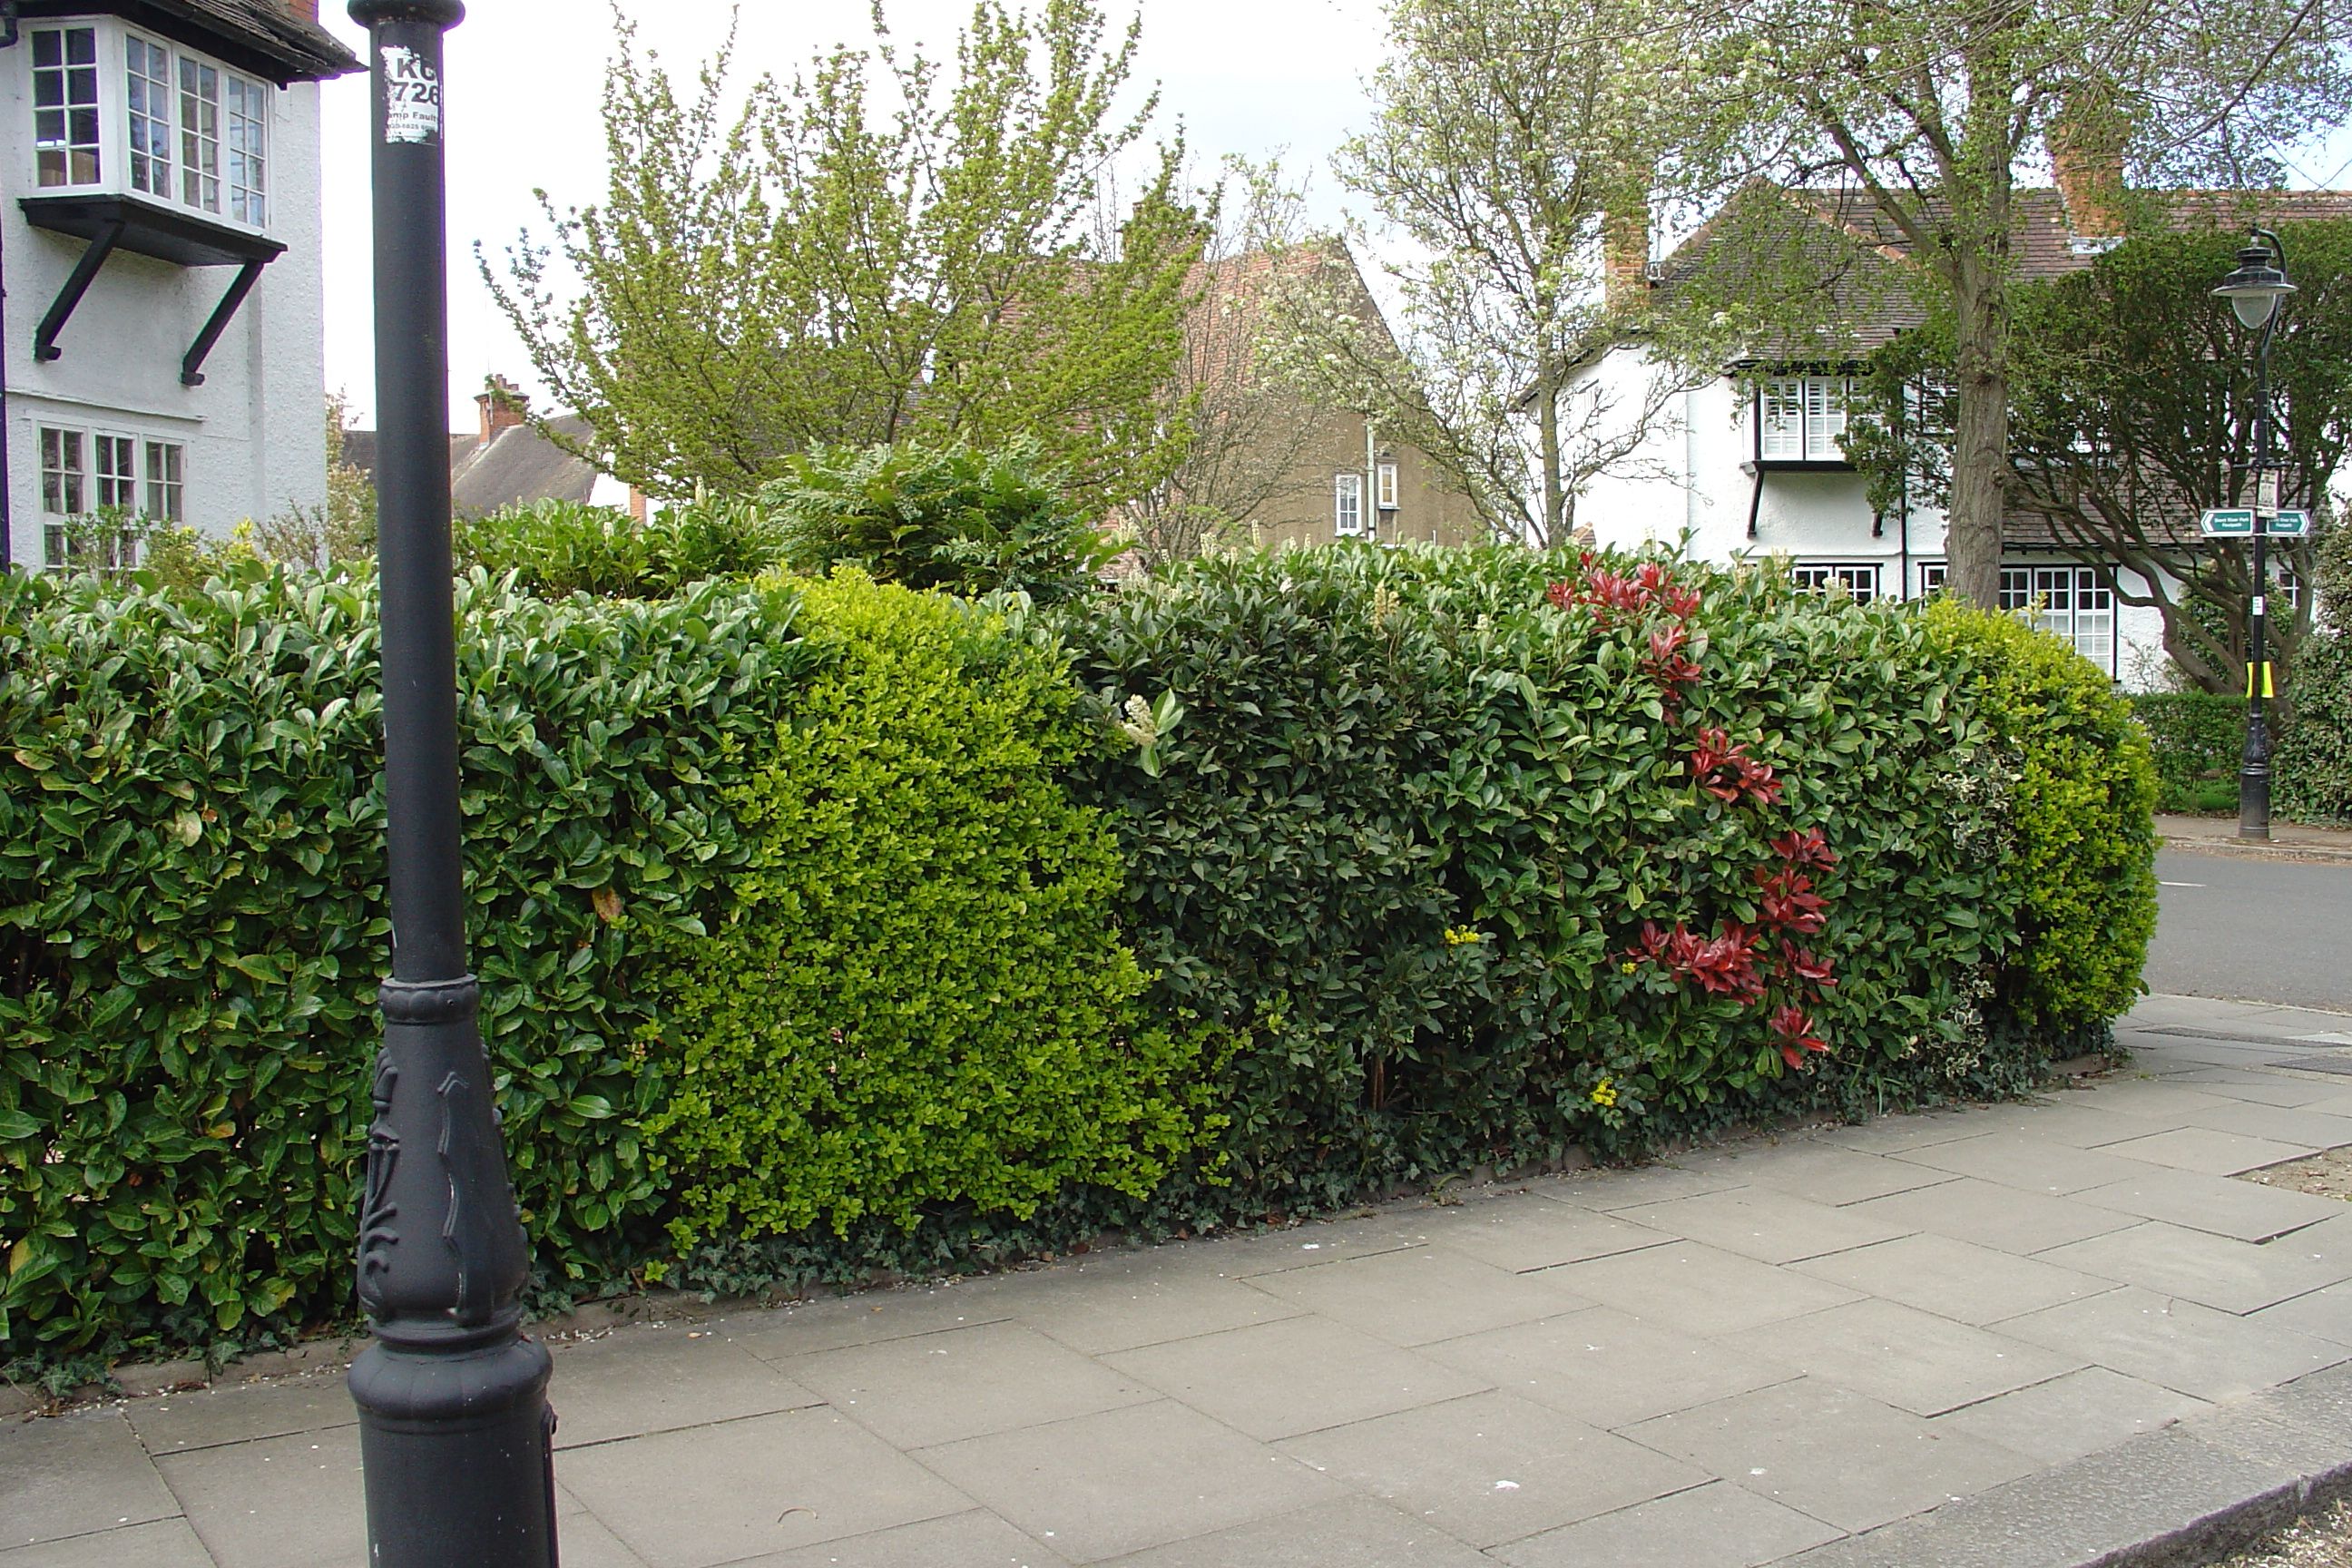 Photo of a hedge containing several shrub species including privet, cherry laurel and Photinia